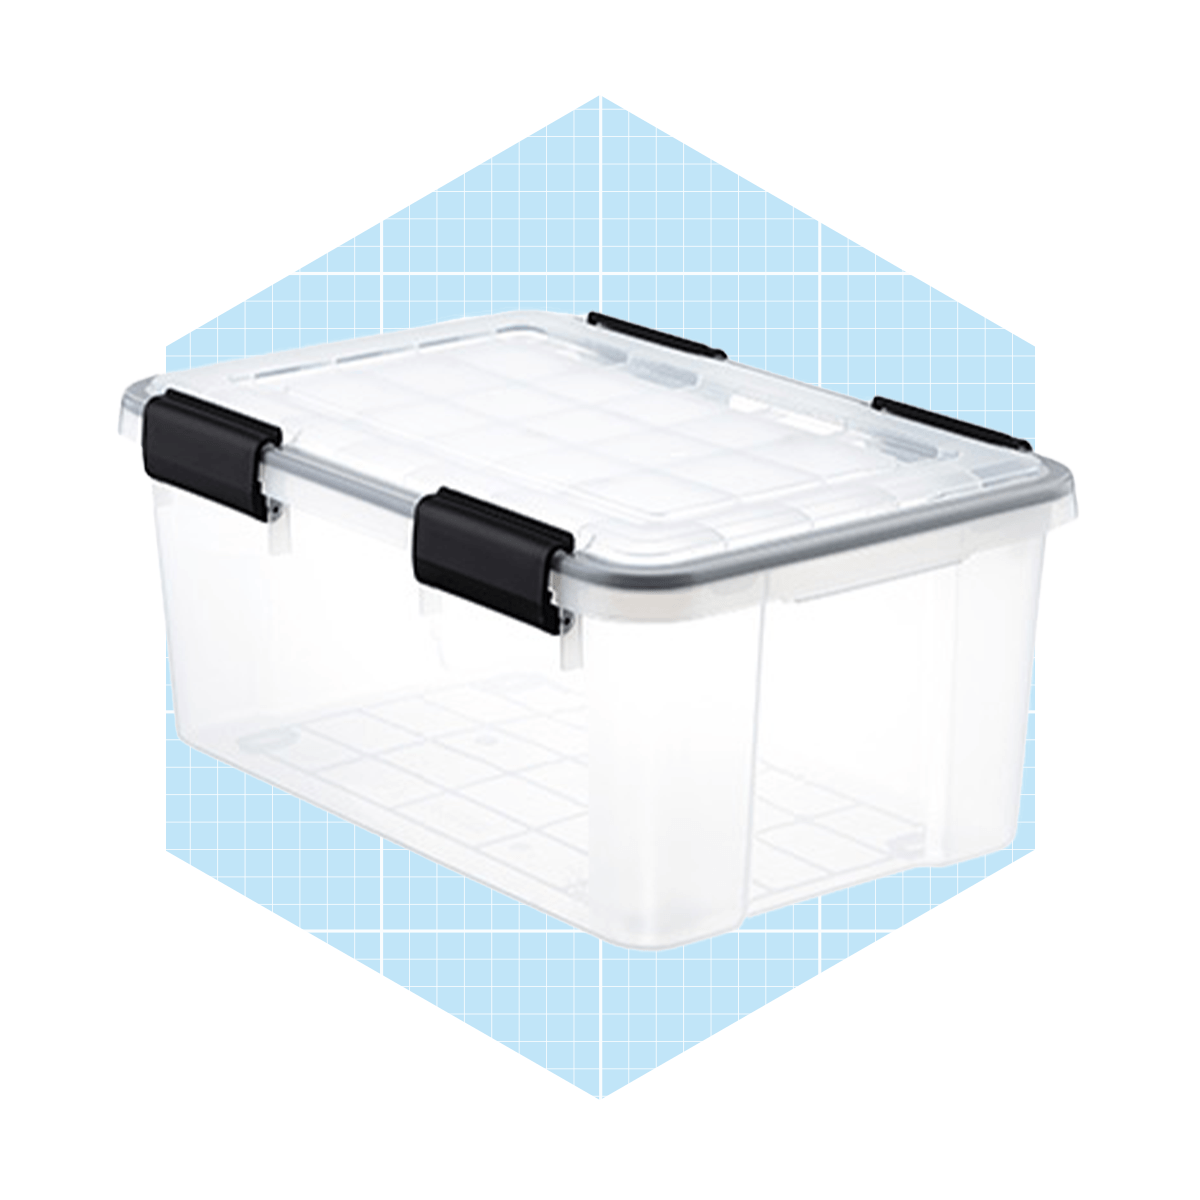 Clear Weatherright Tote Ecomm Via Containerstore.com